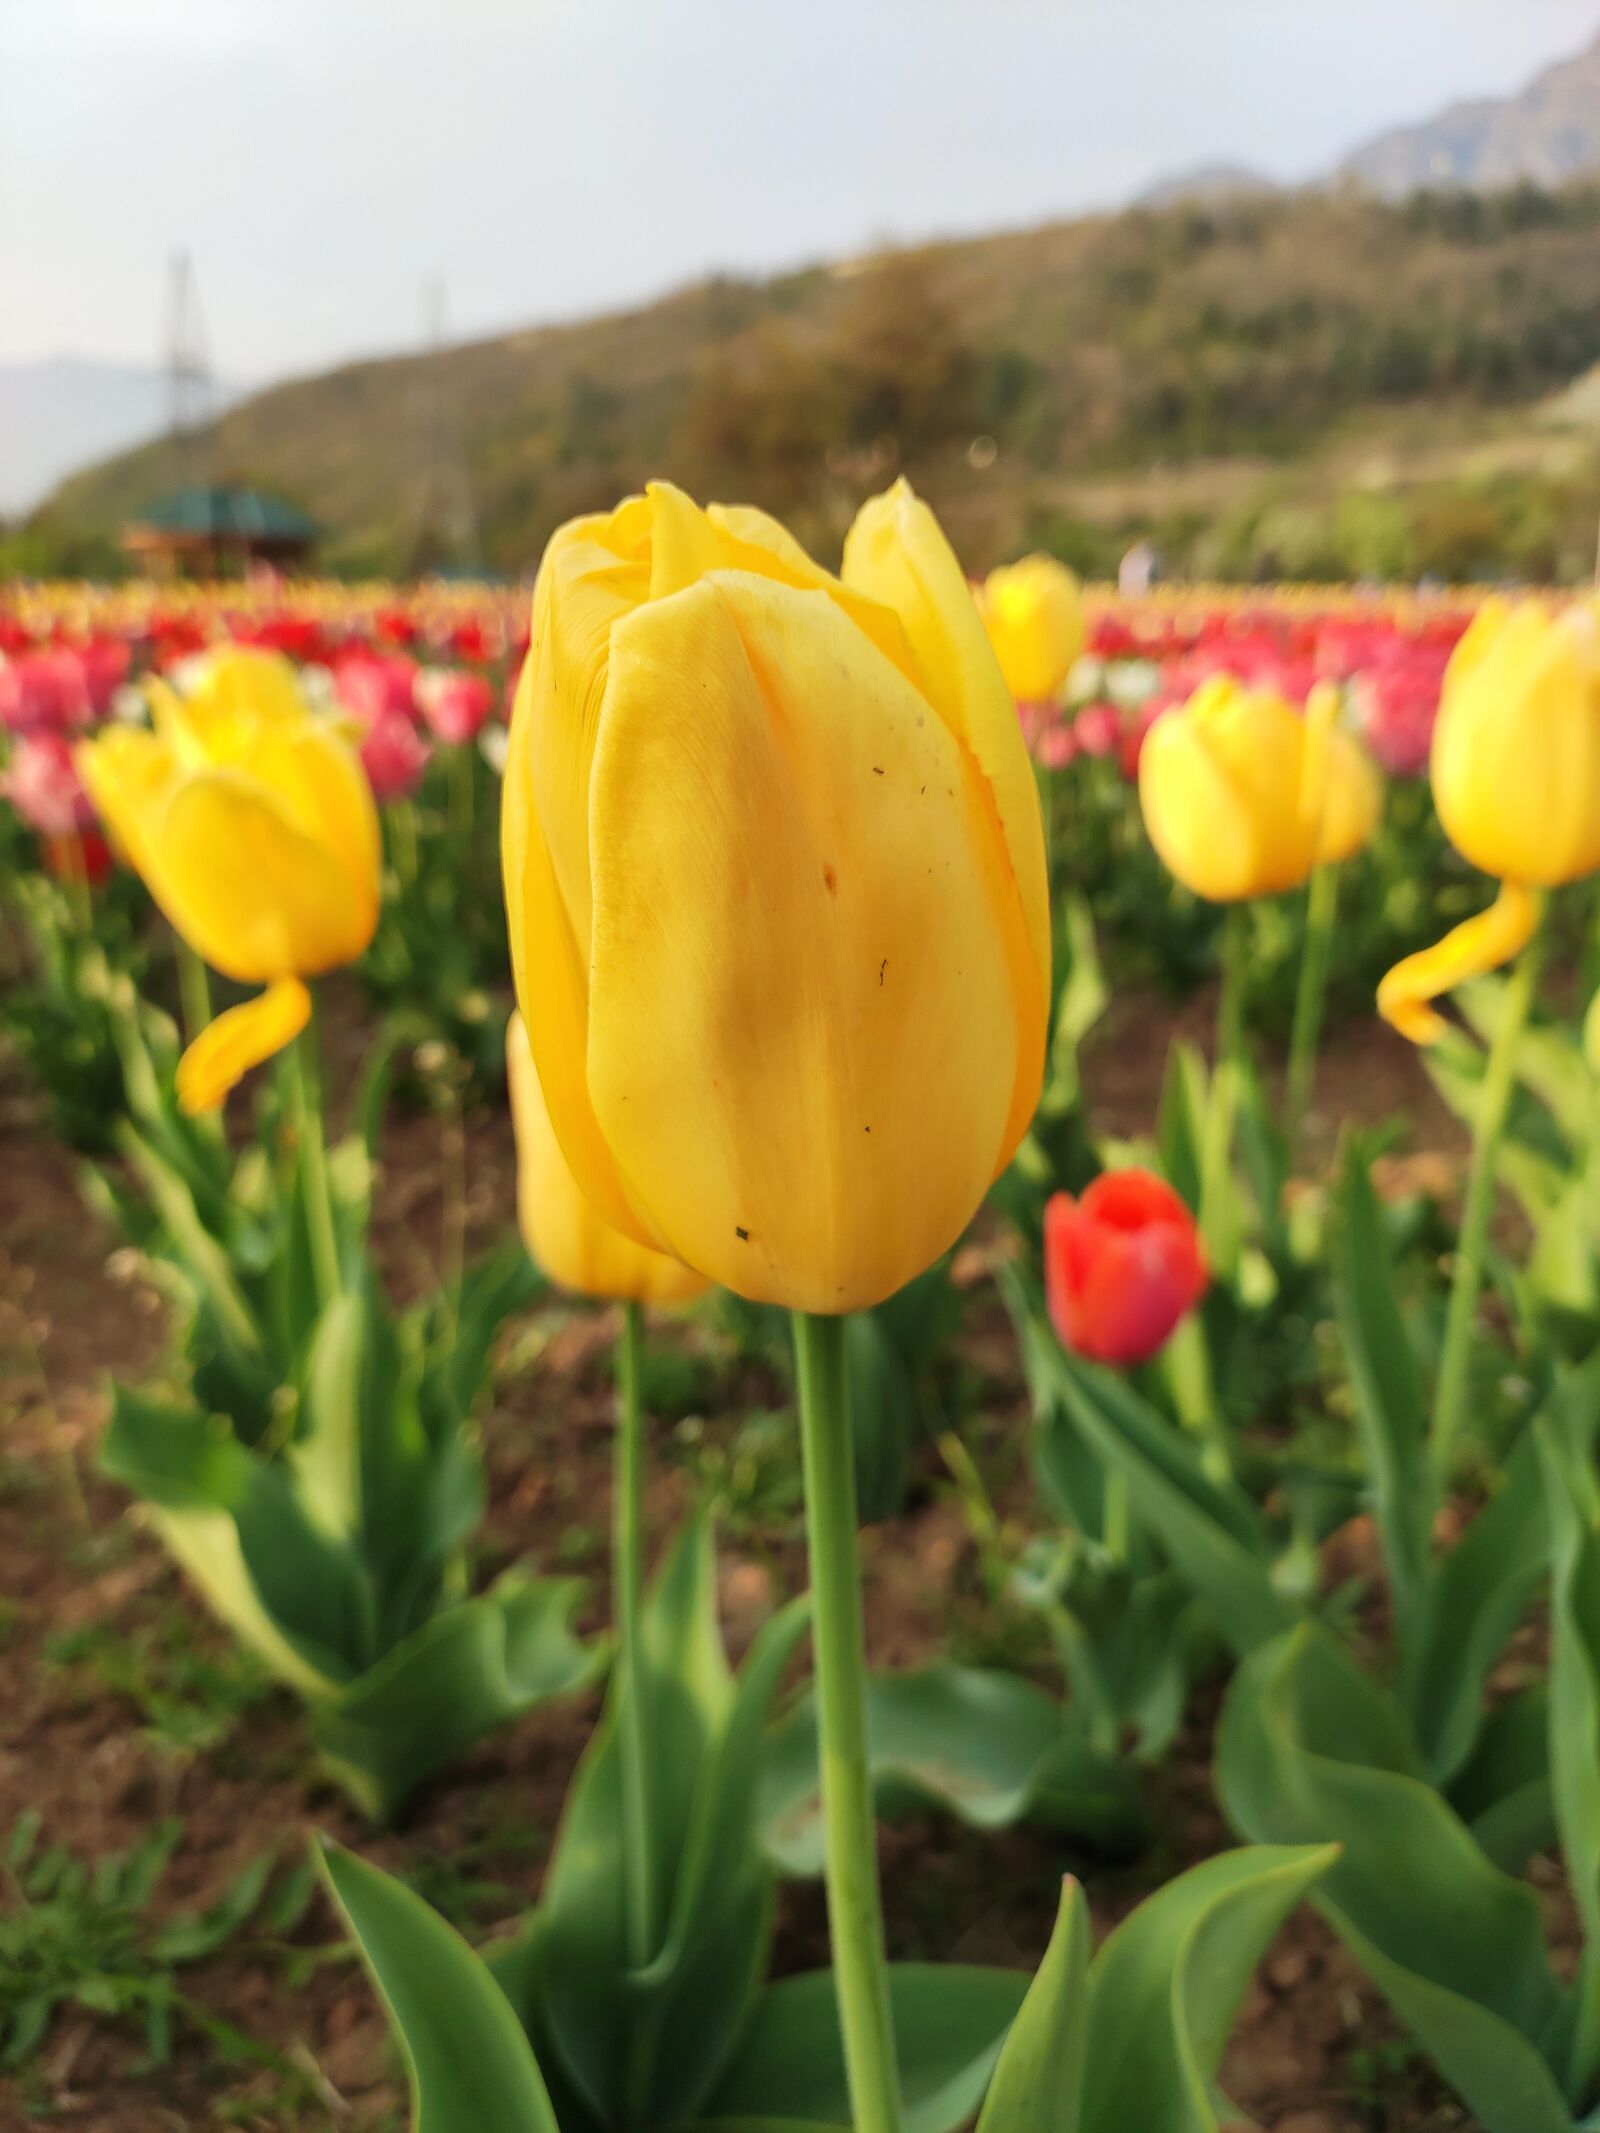 Xiaomi Redmi Note 7 Pro sample photo. Flowers, tulips, field photography